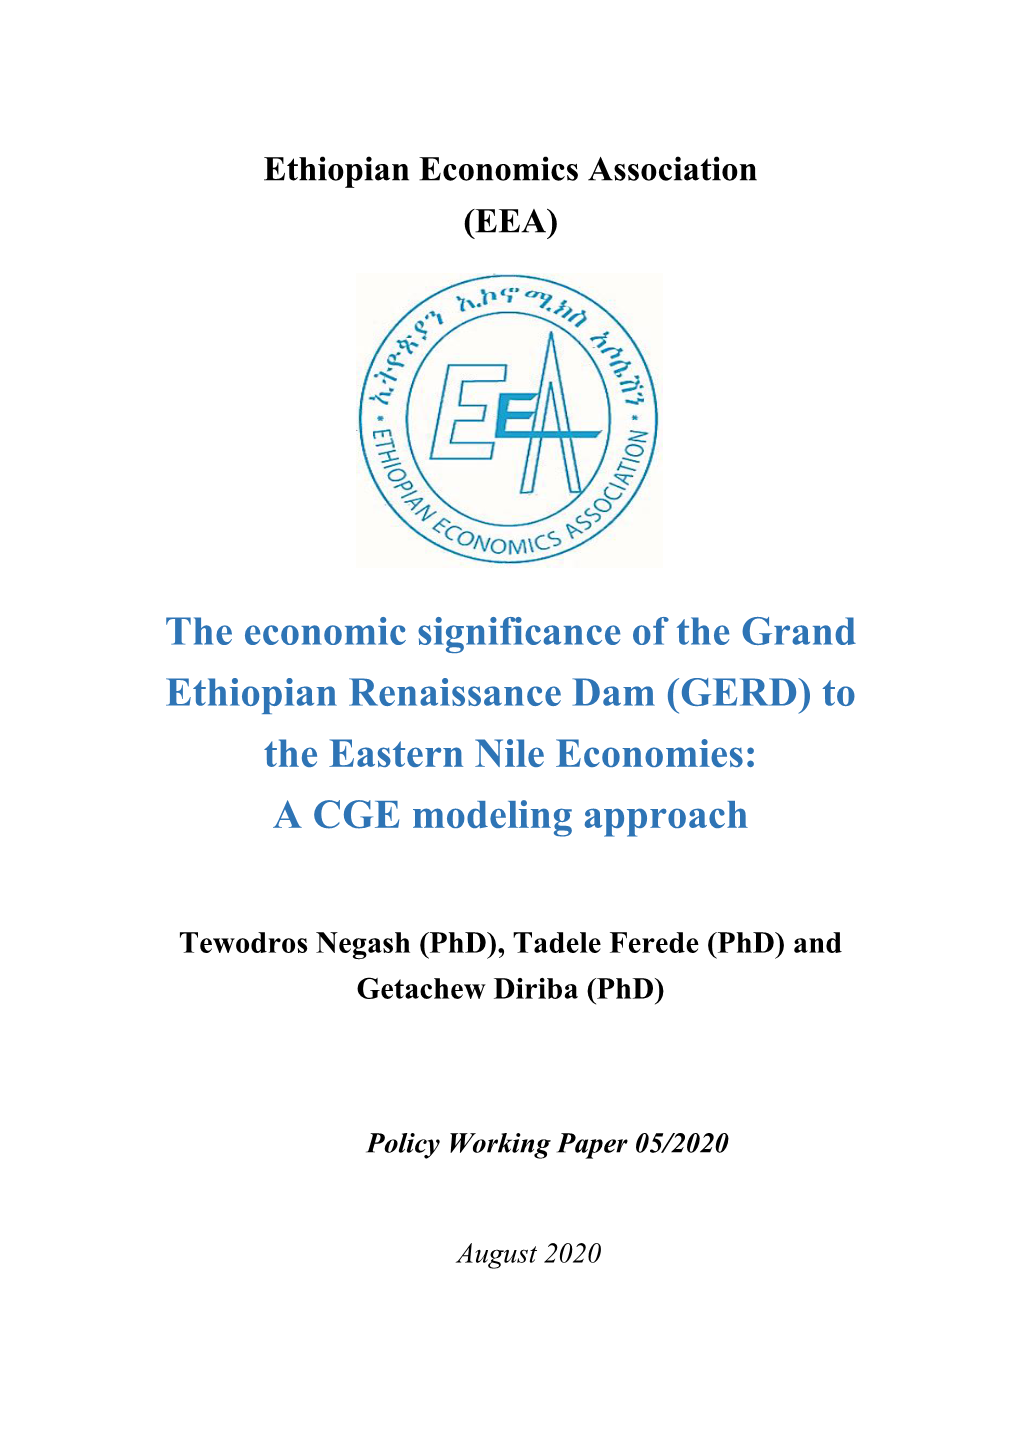 (GERD) to the Eastern Nile Economies: a CGE Modeling Approach